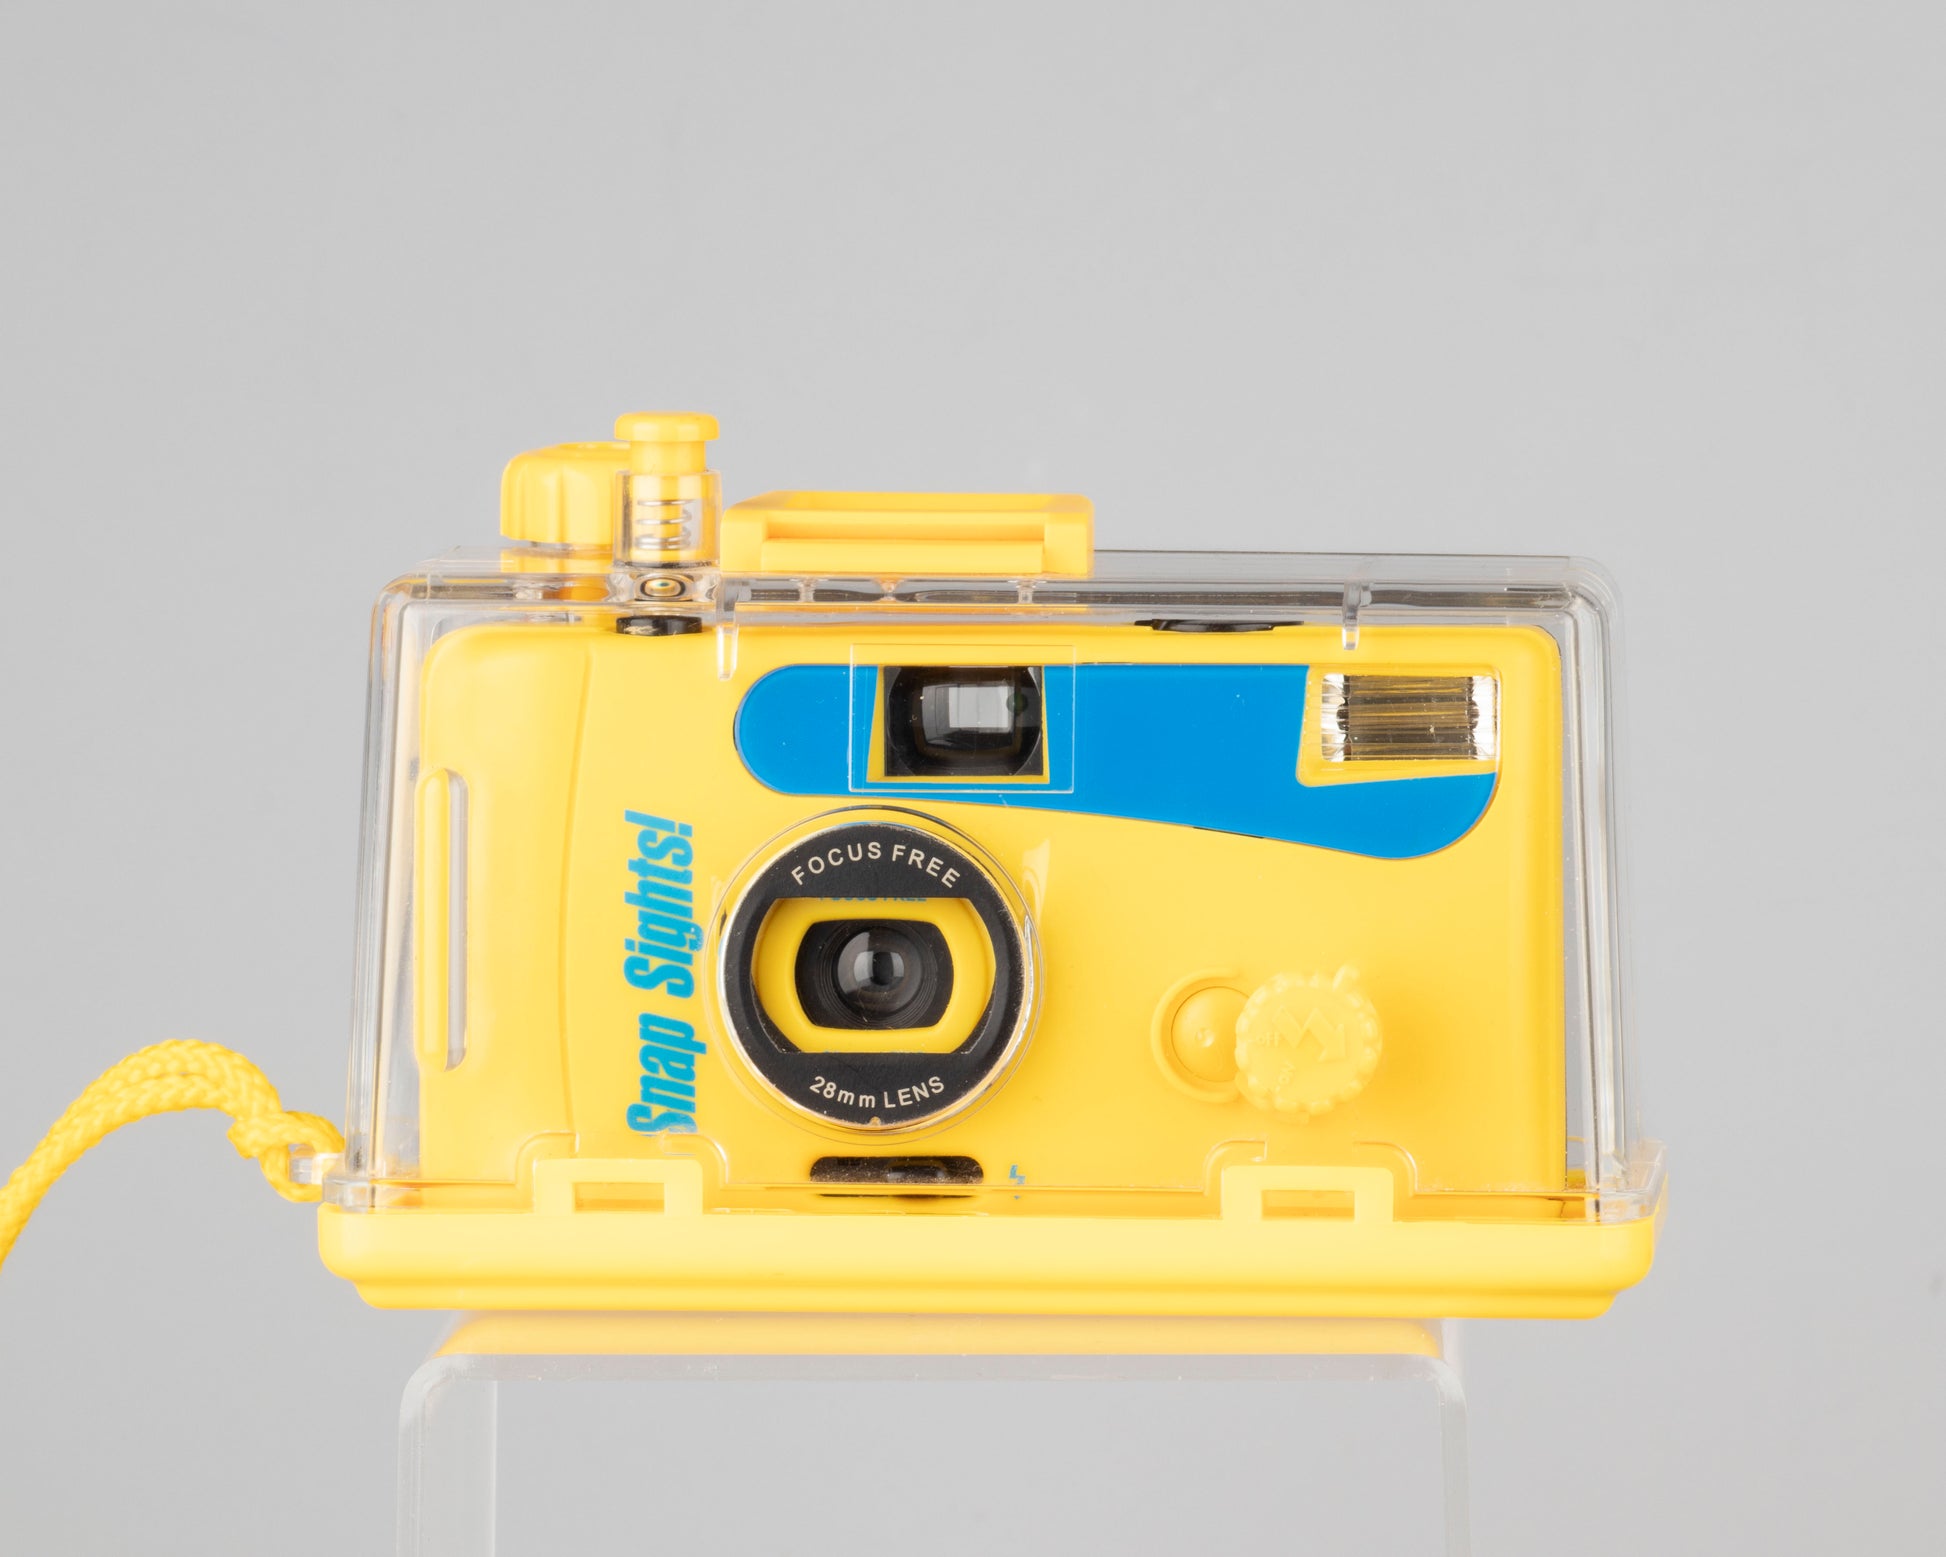 The Snap Sights SS0 is an underwater film camera from circa 2005